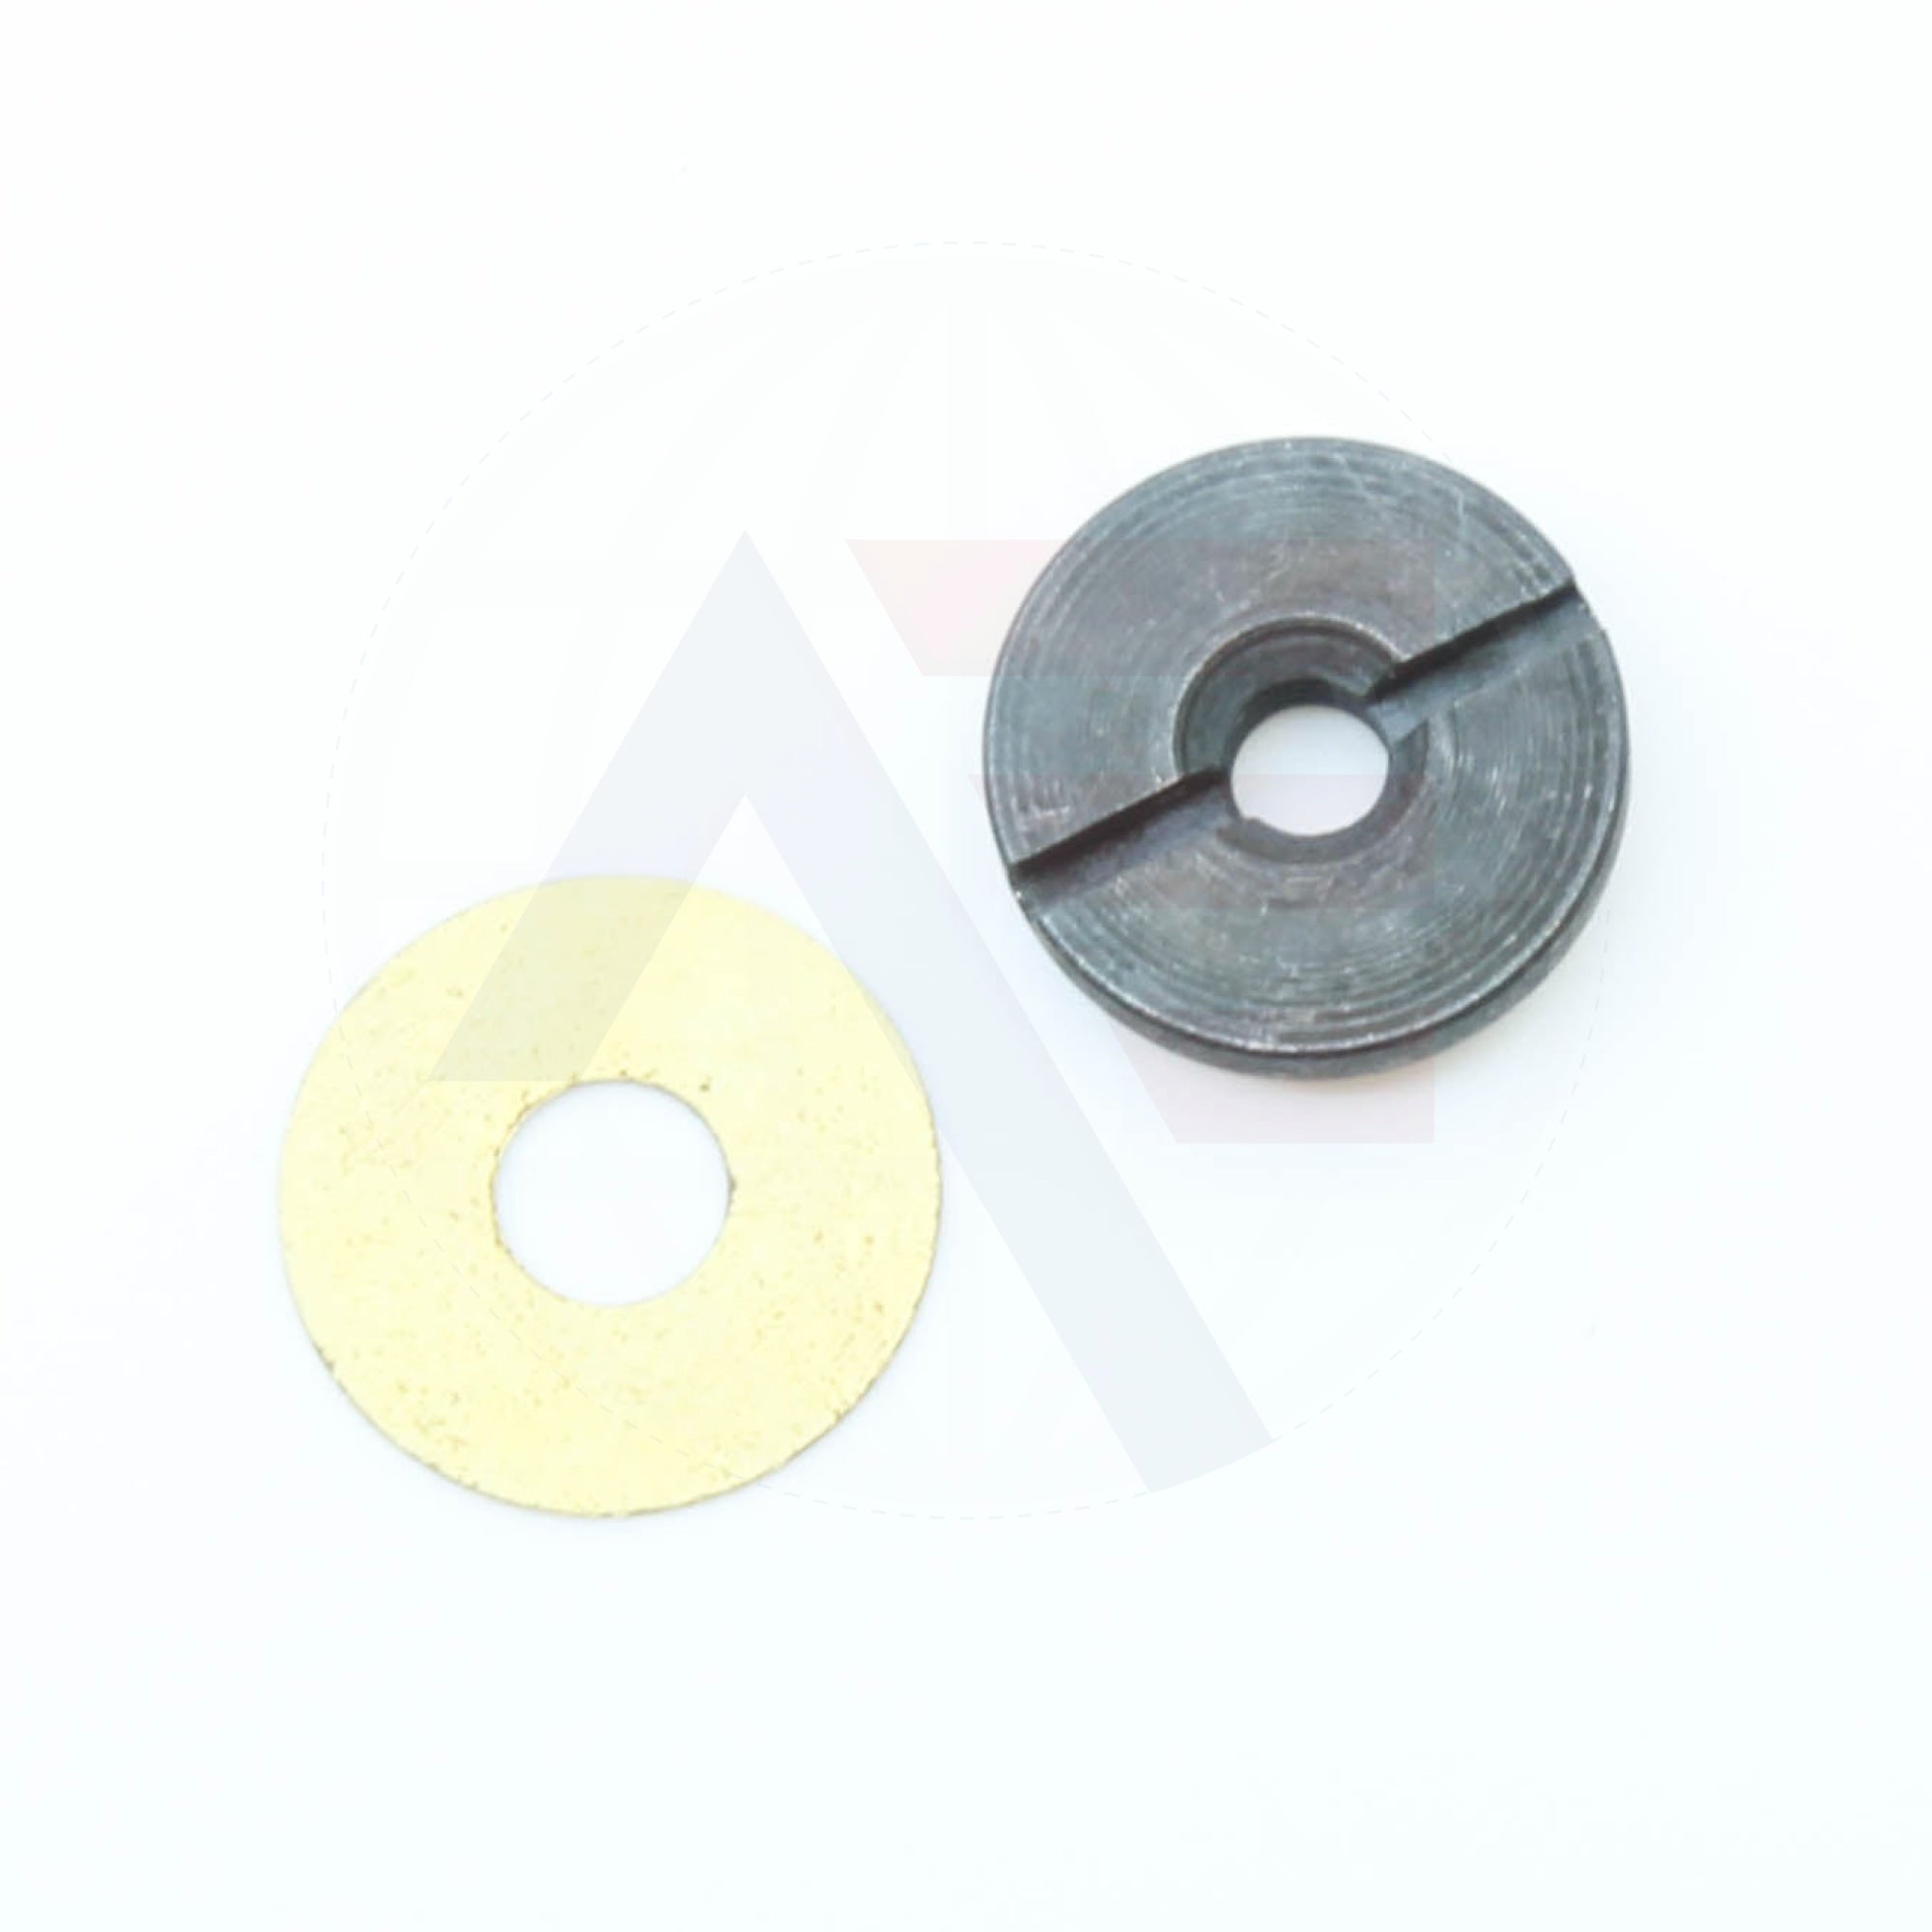 Dayang Rsd-100 S177 Washer For Lower Blade